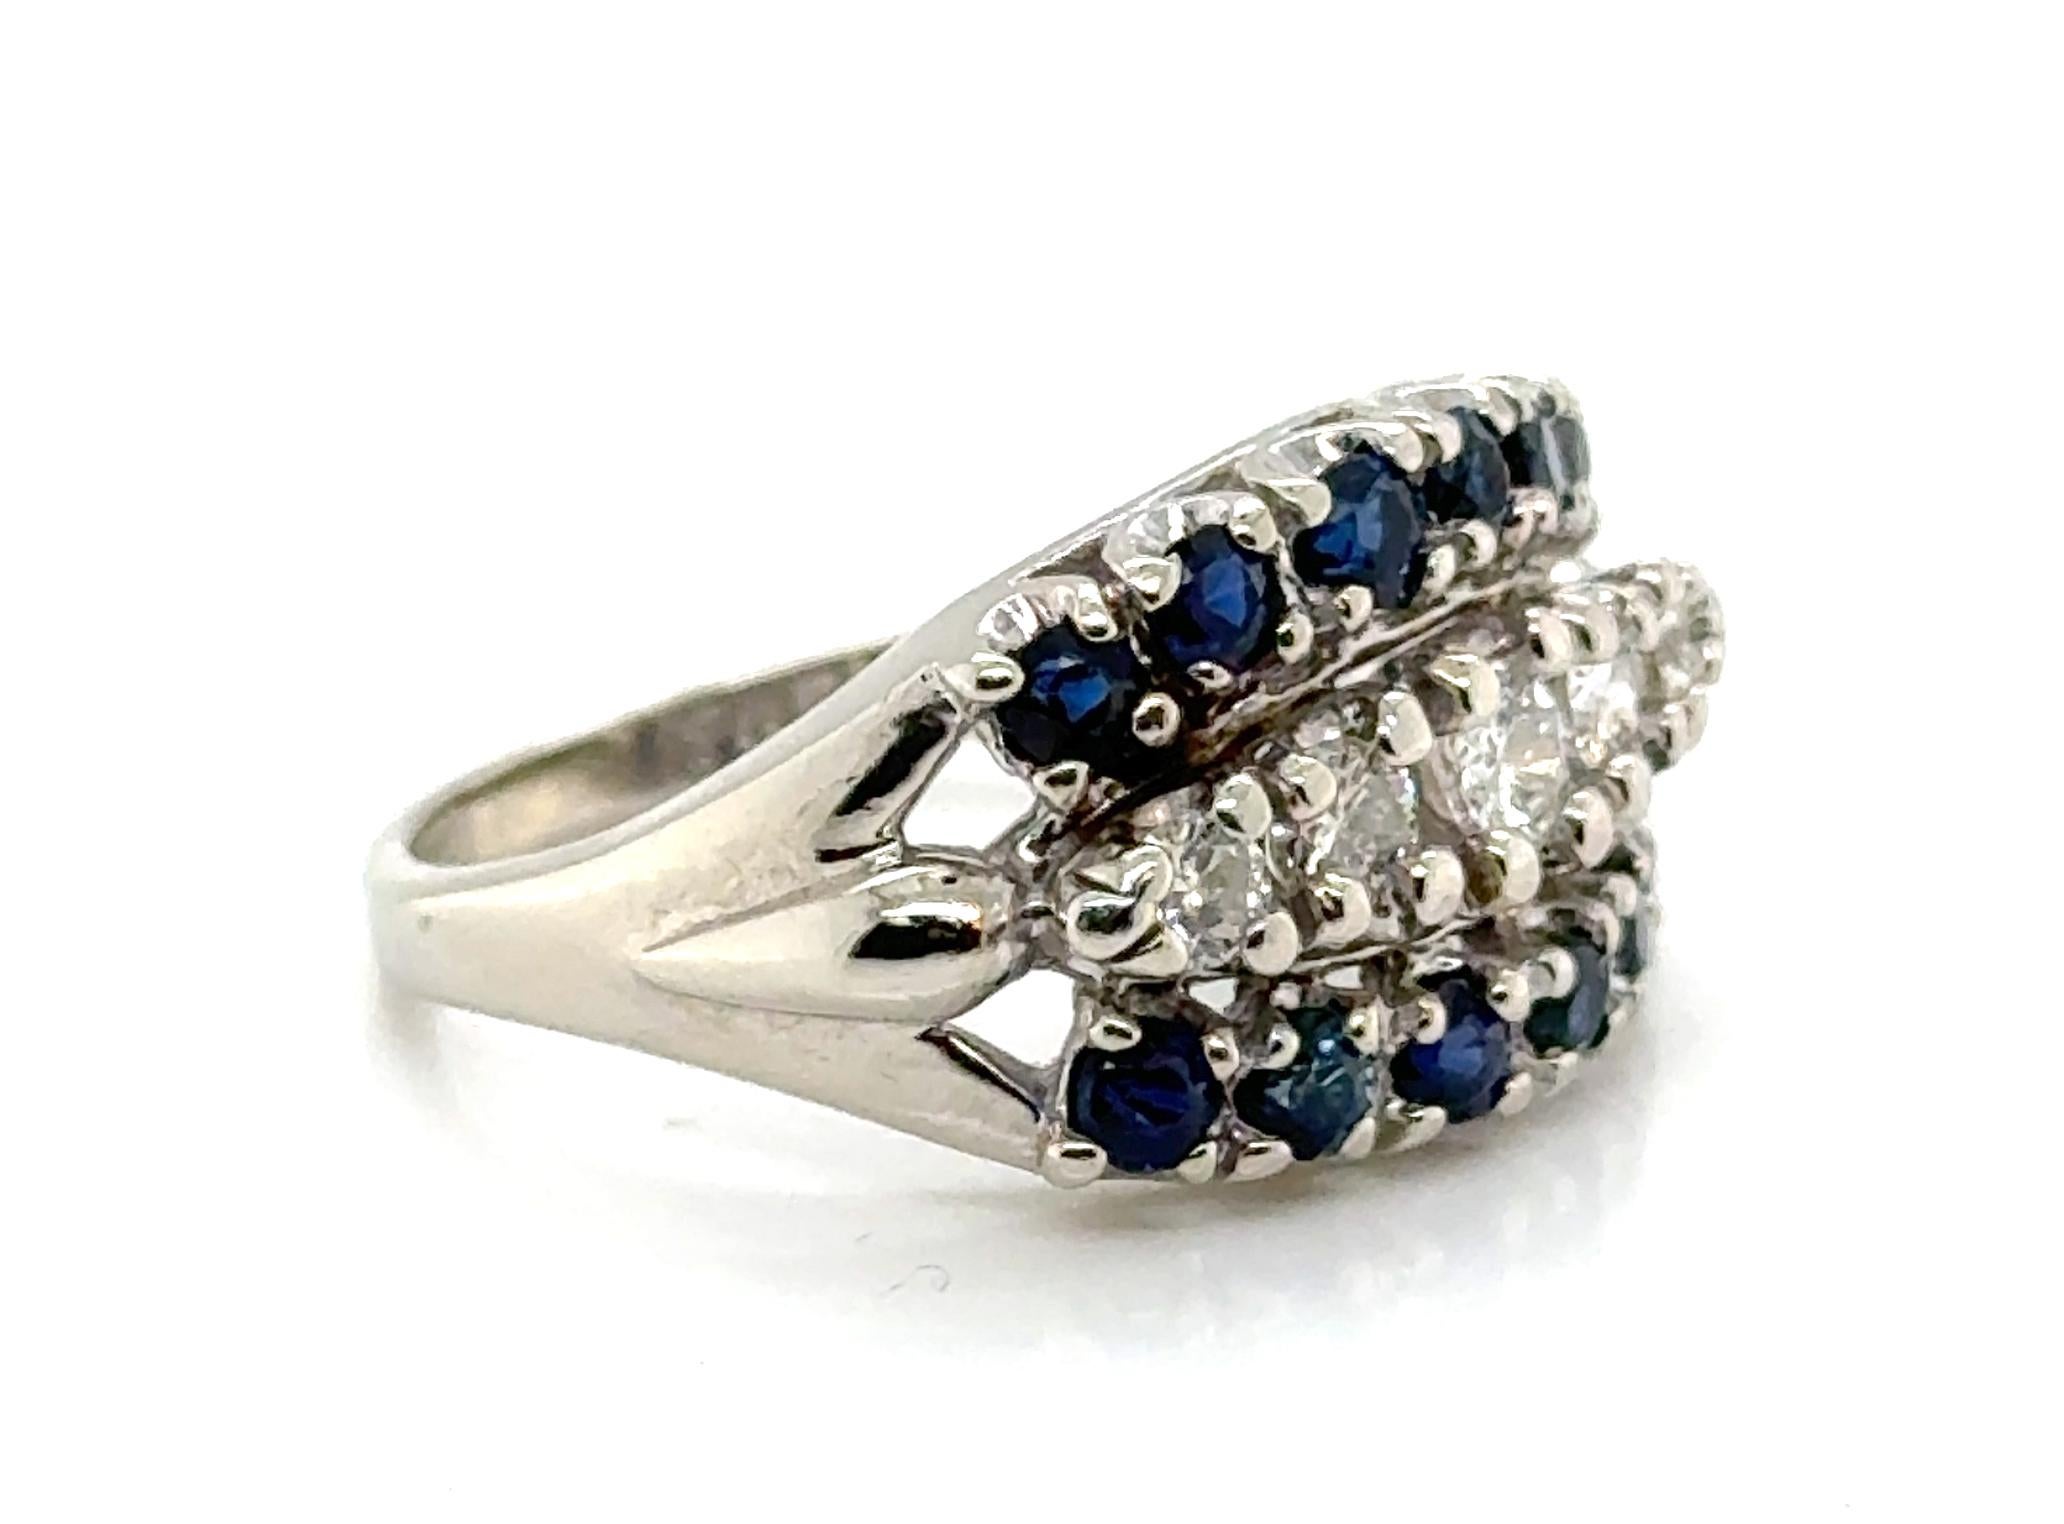 Genuine Original Art Deco Antique from 1930's Vintage Sapphire Diamond Cocktail Ring 1ct 14K


Featuring Brilliant Bold Natural Blue Sapphires and Round Brilliant Cut Diamonds

Clean and Clear Natural Mined Diamonds

100% Natural Sapphires & Mined